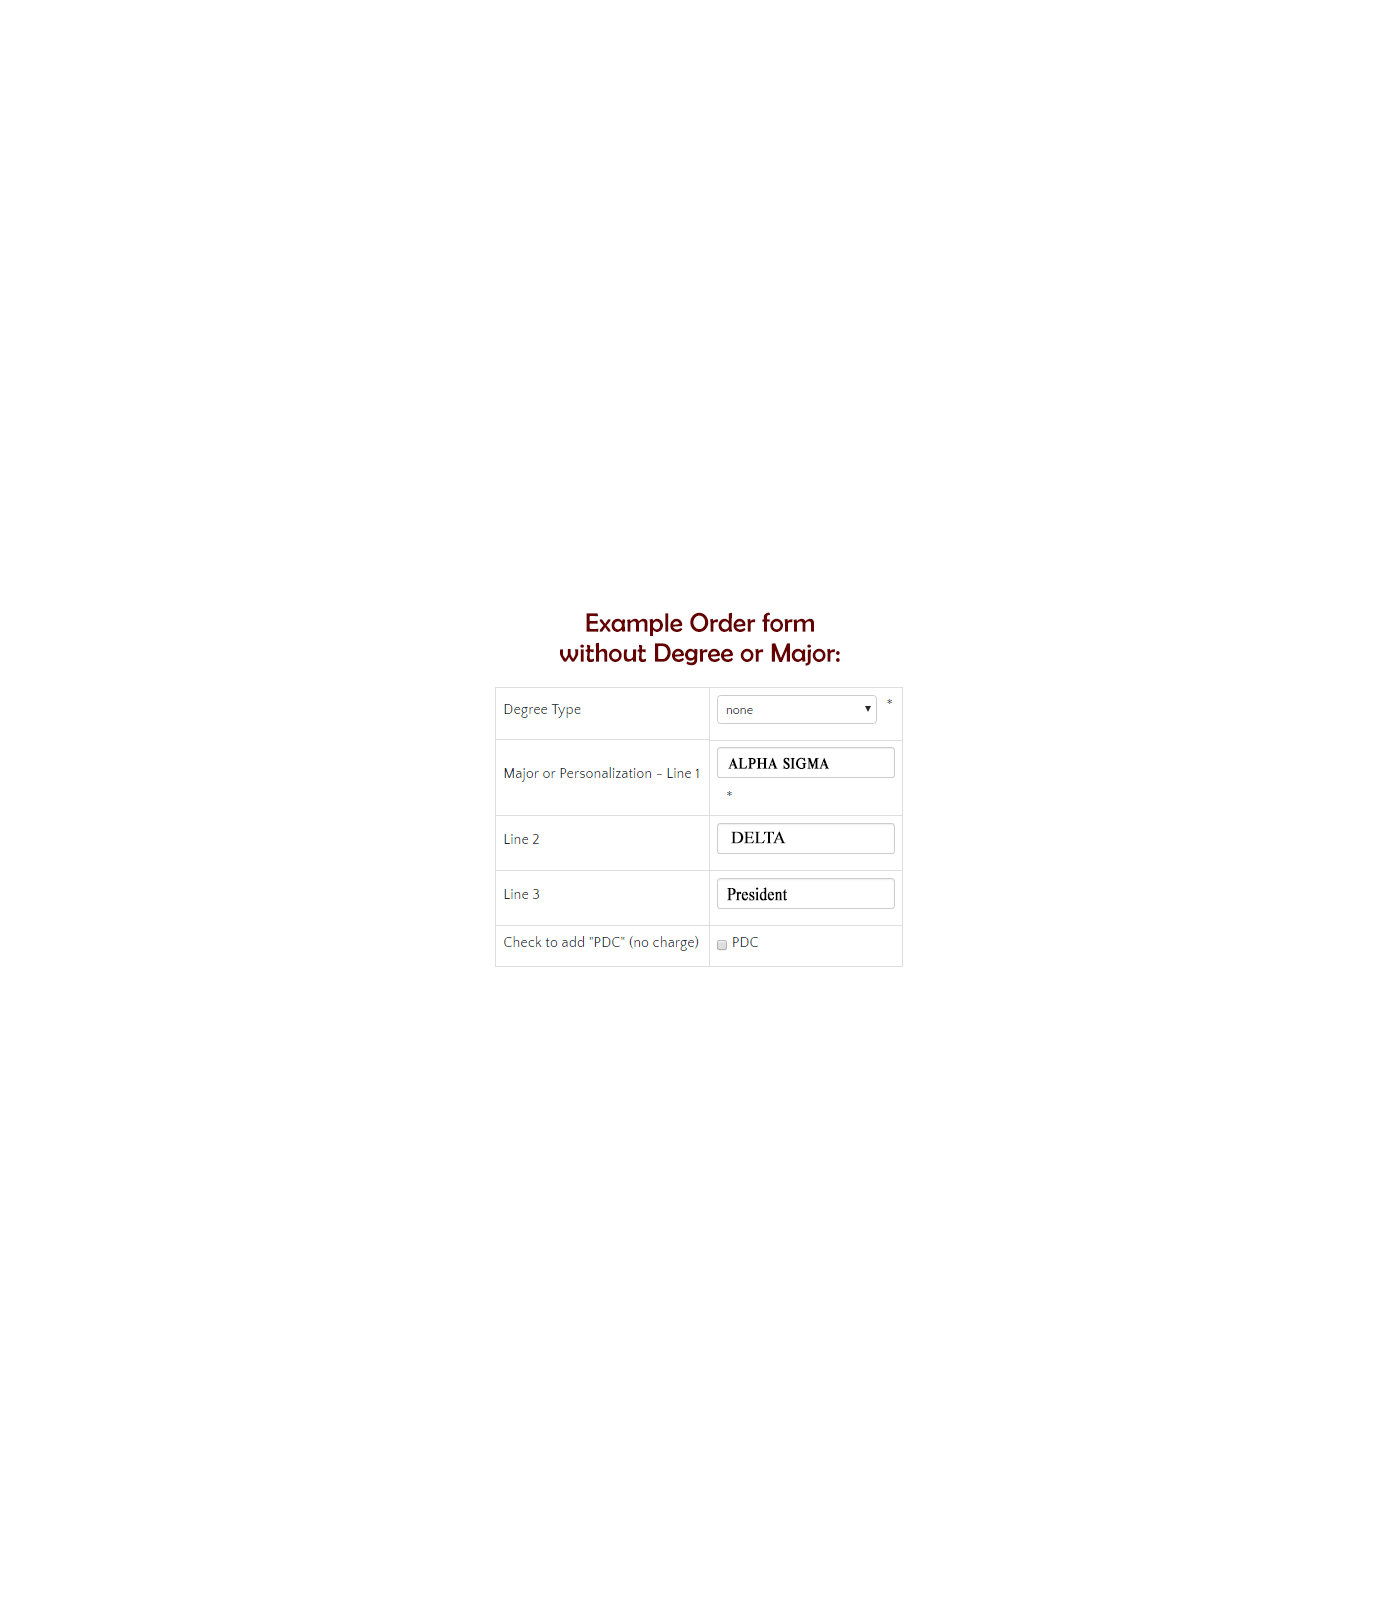 example_order_form_without_degree_or_major_1045771360